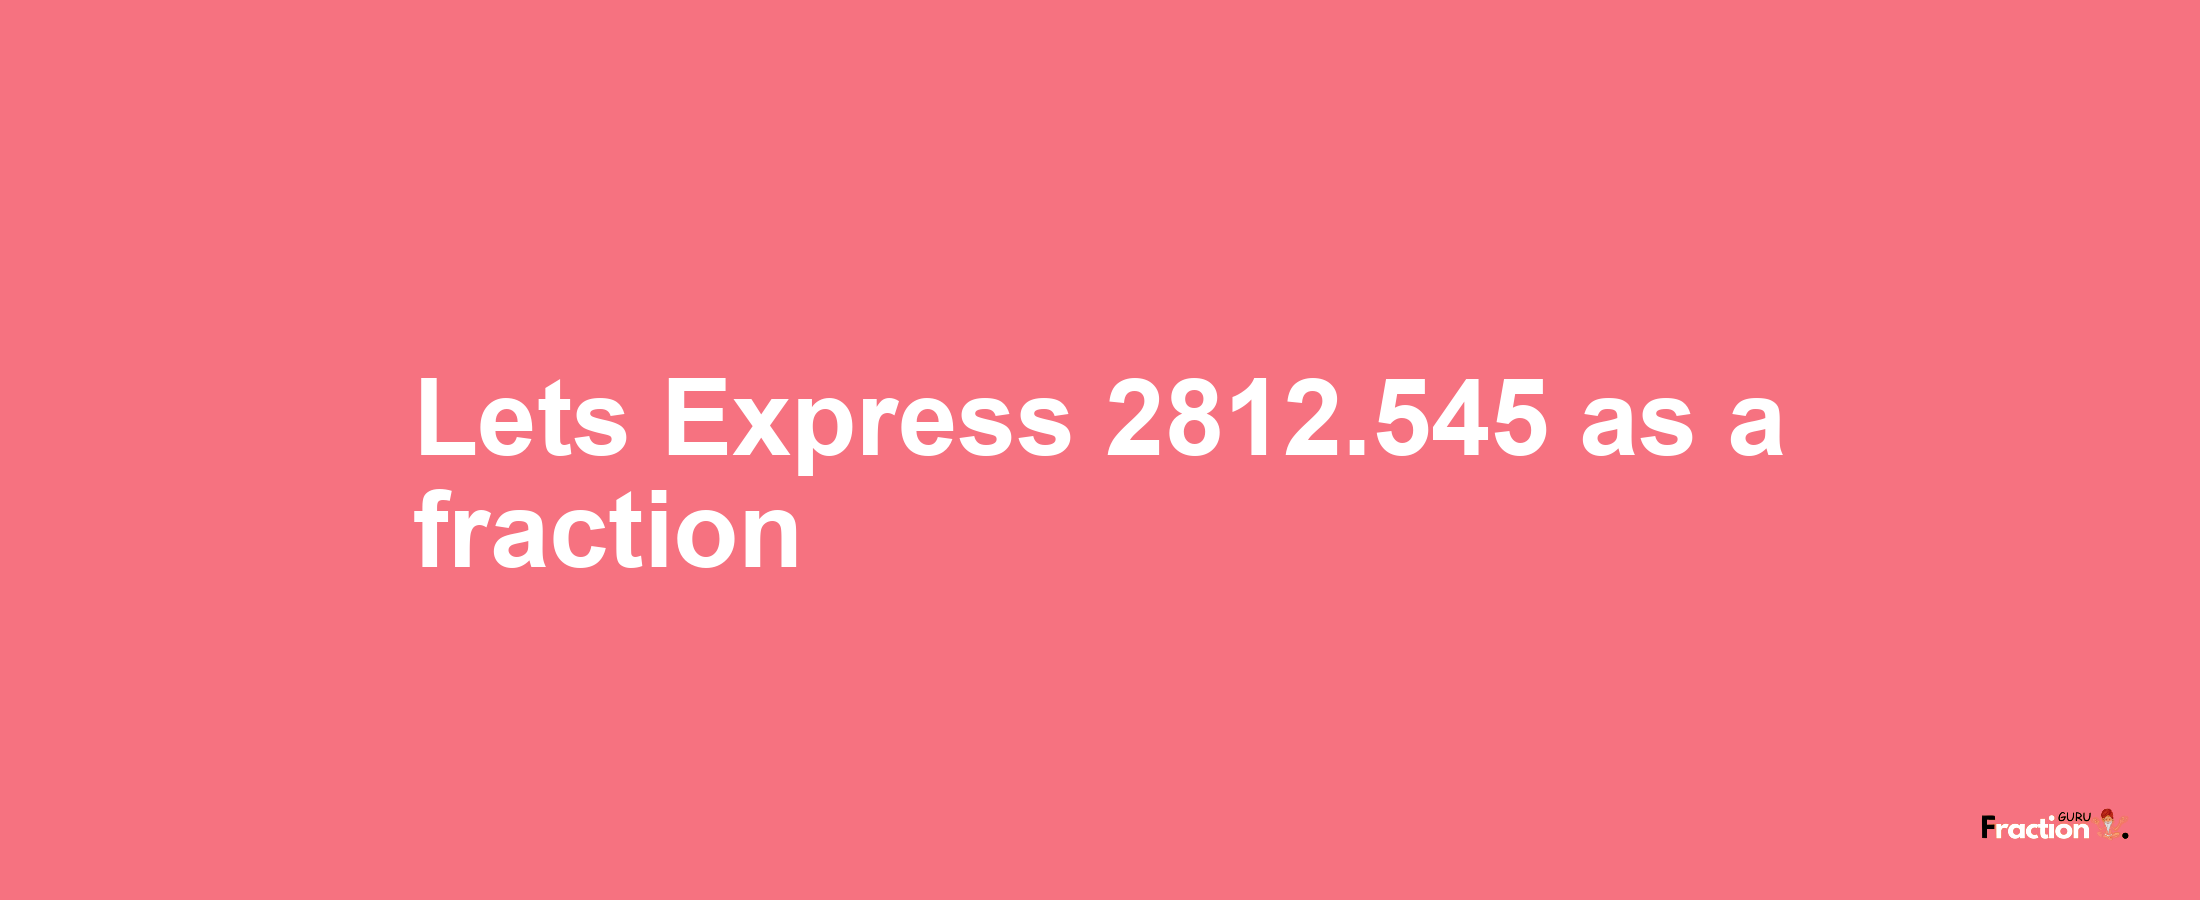 Lets Express 2812.545 as afraction